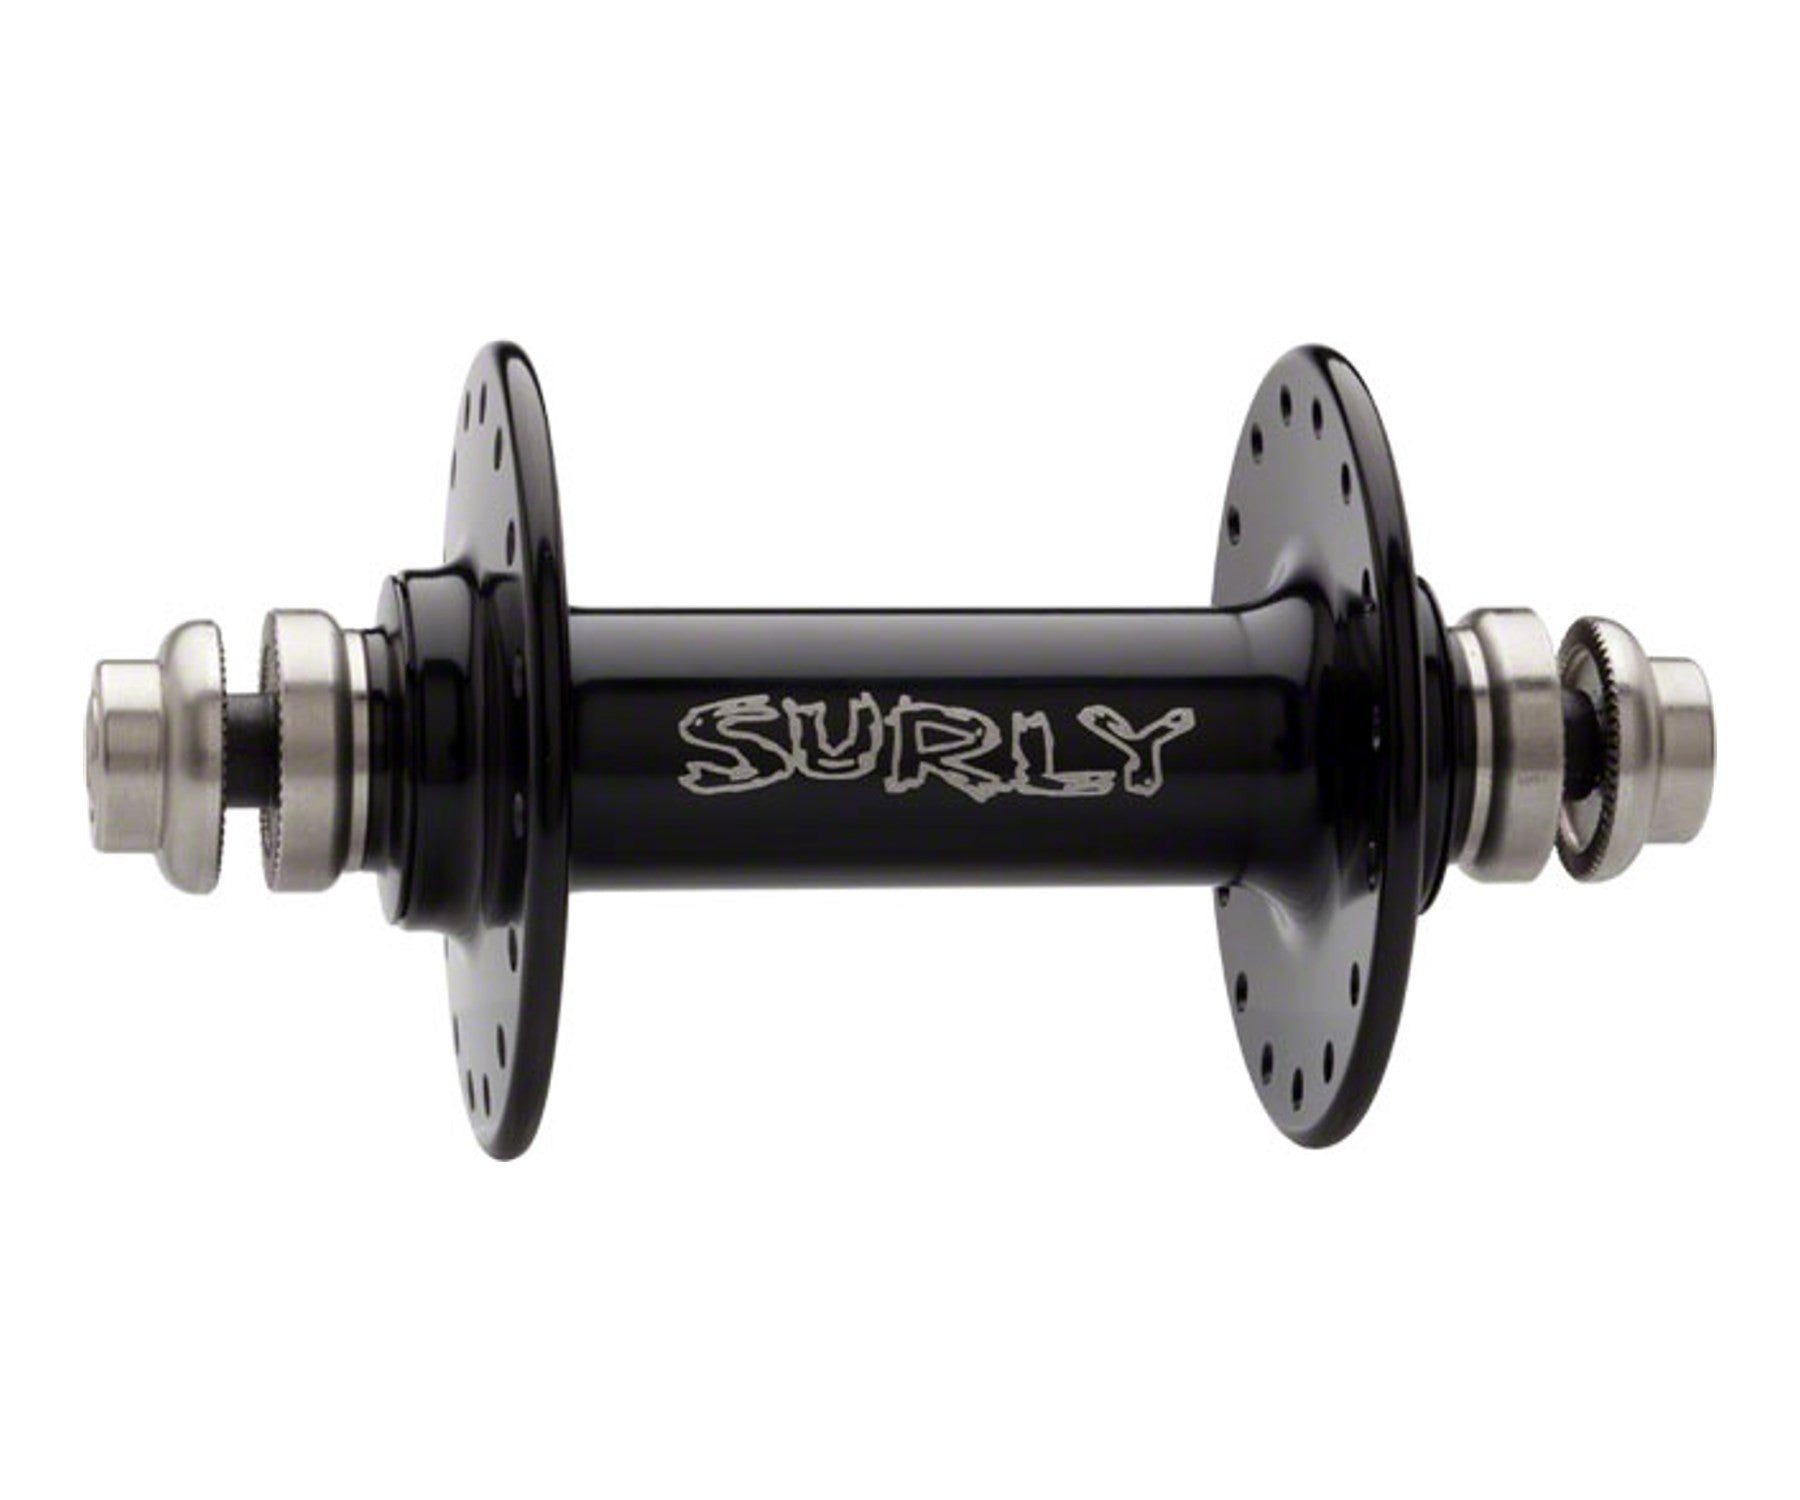 Surly Ultra New front track hub - Retrogression Fixed Gear